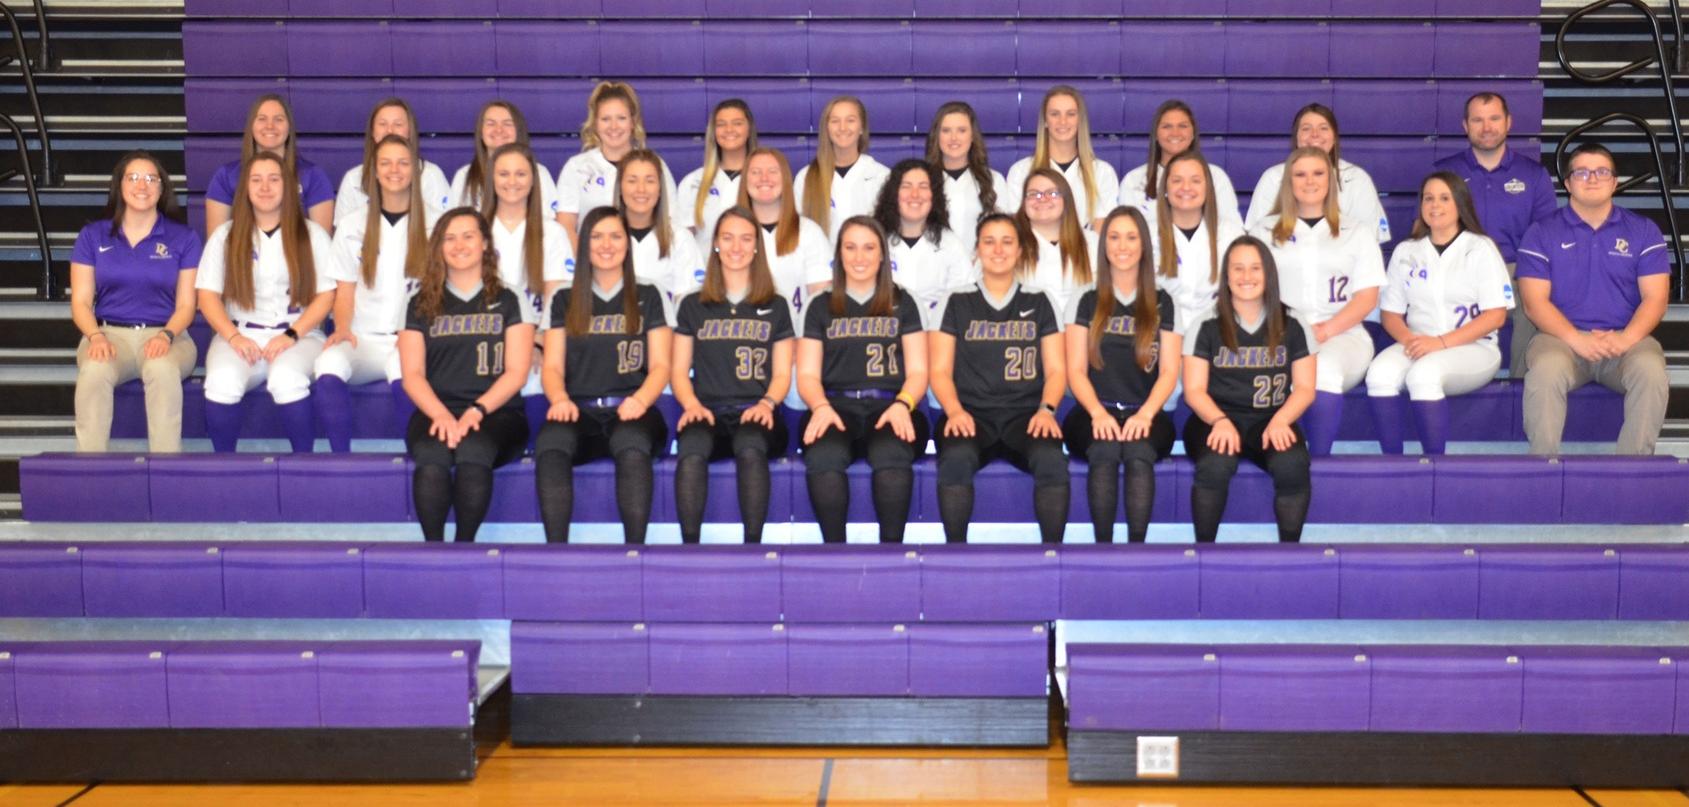 Softball Looks to Balanced Roster in 2019